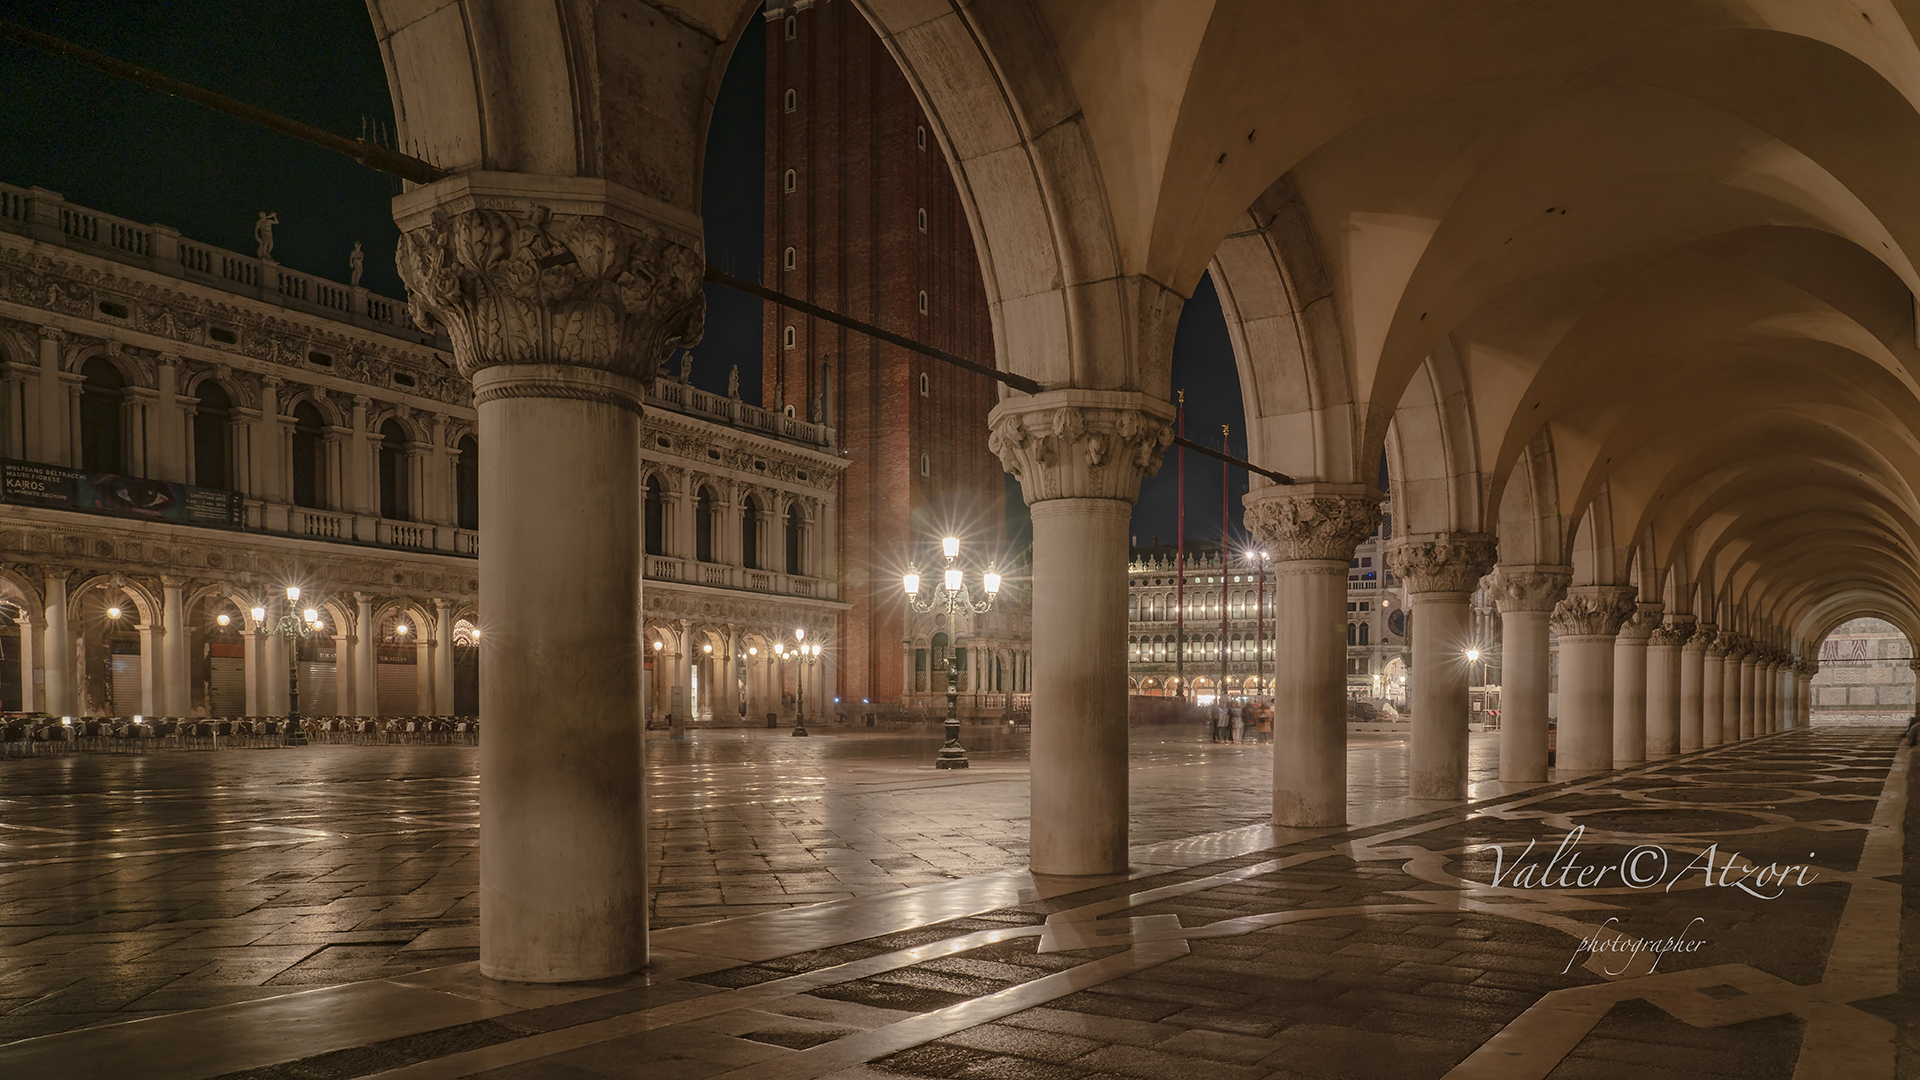 Glimpse of St. Mark's Square from the colonnade ...